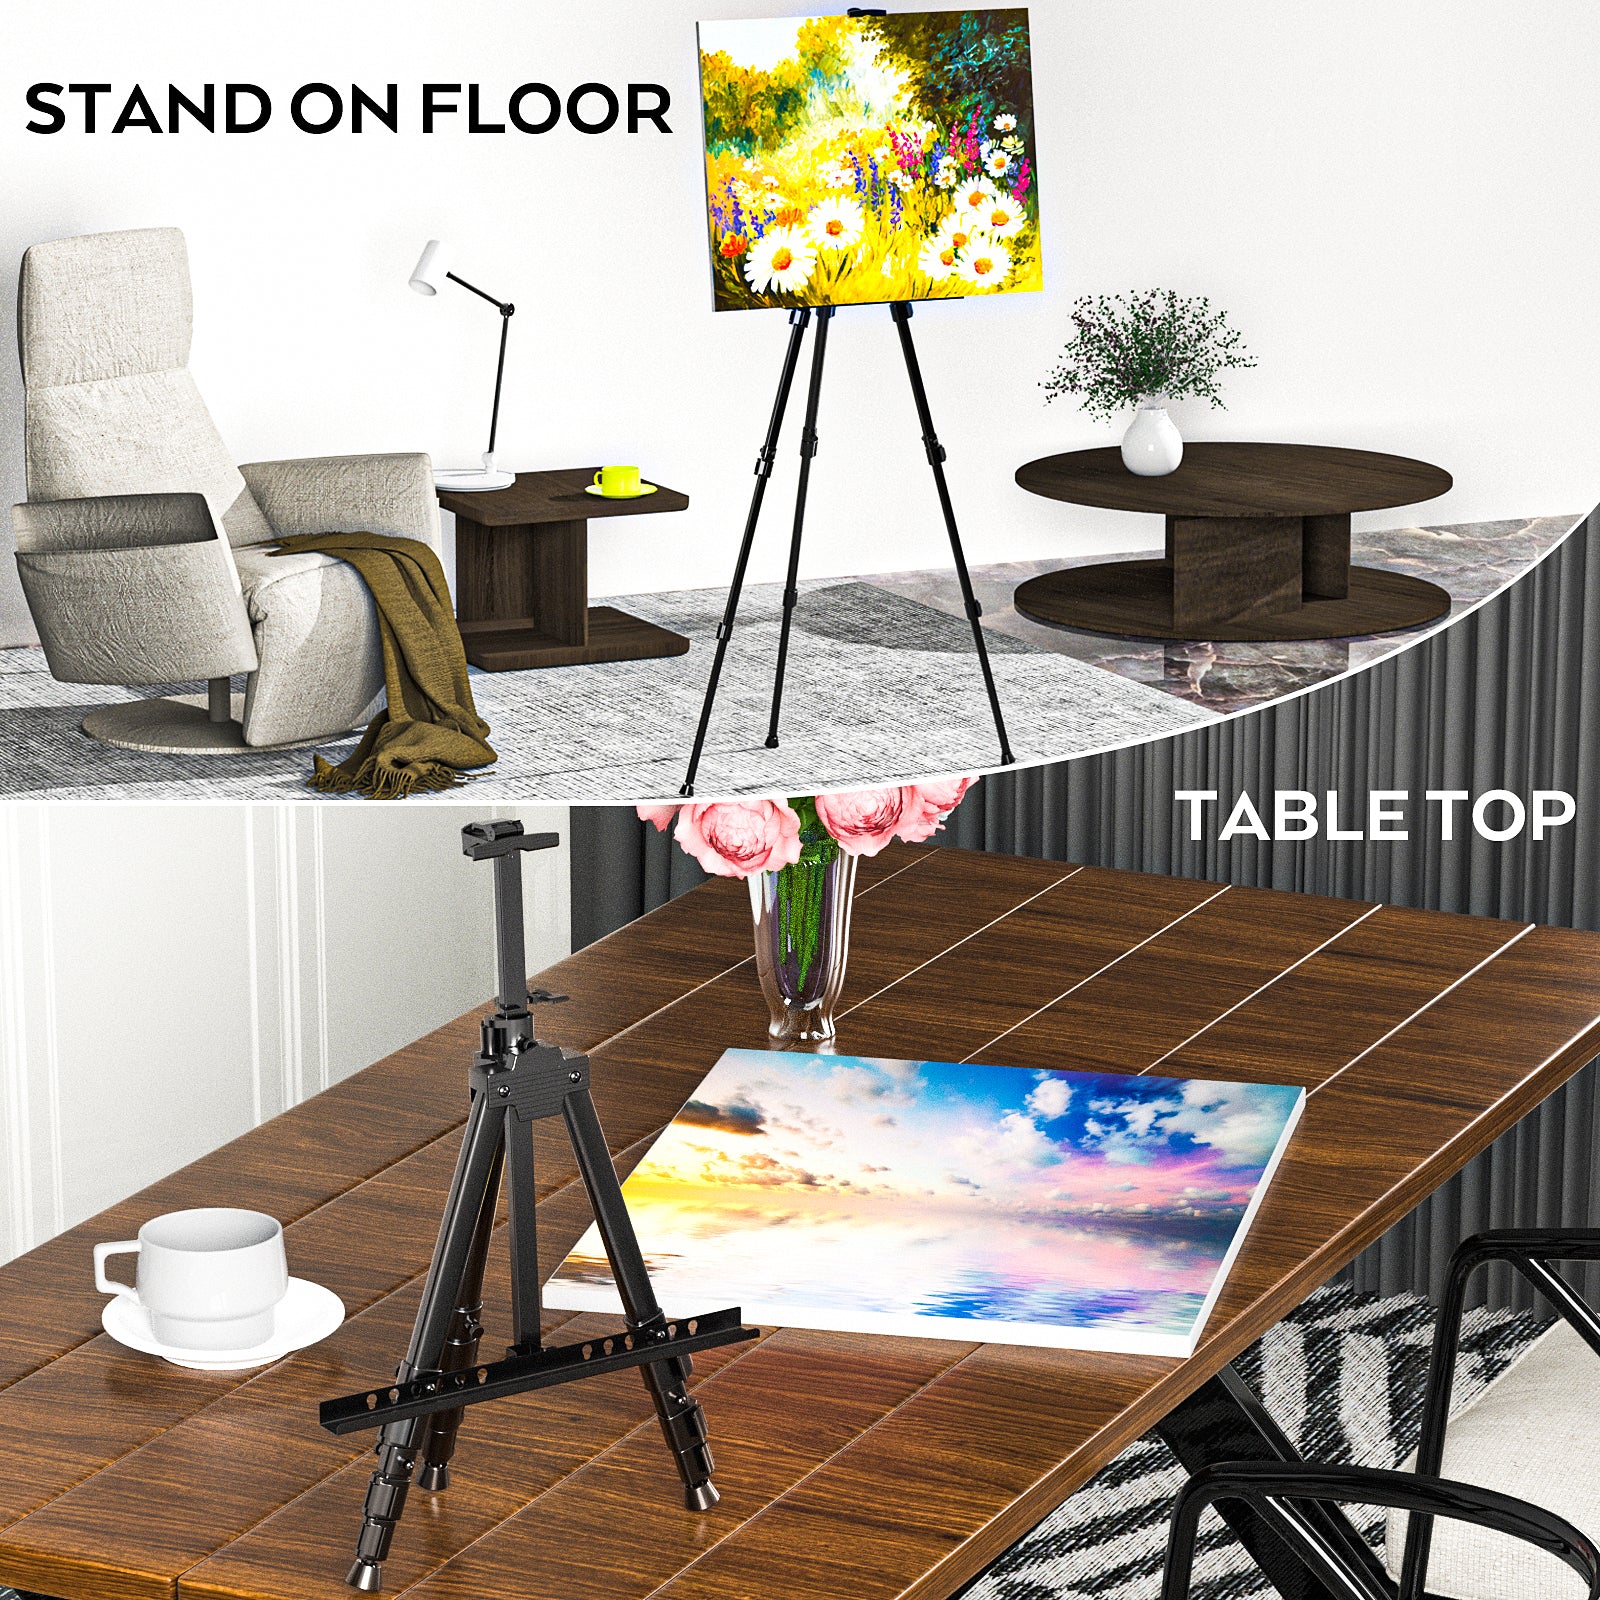 JETTINGBUY 3PCS Mini Wooden Tripod Easel Display Painting Stand Card Canvas  Holder